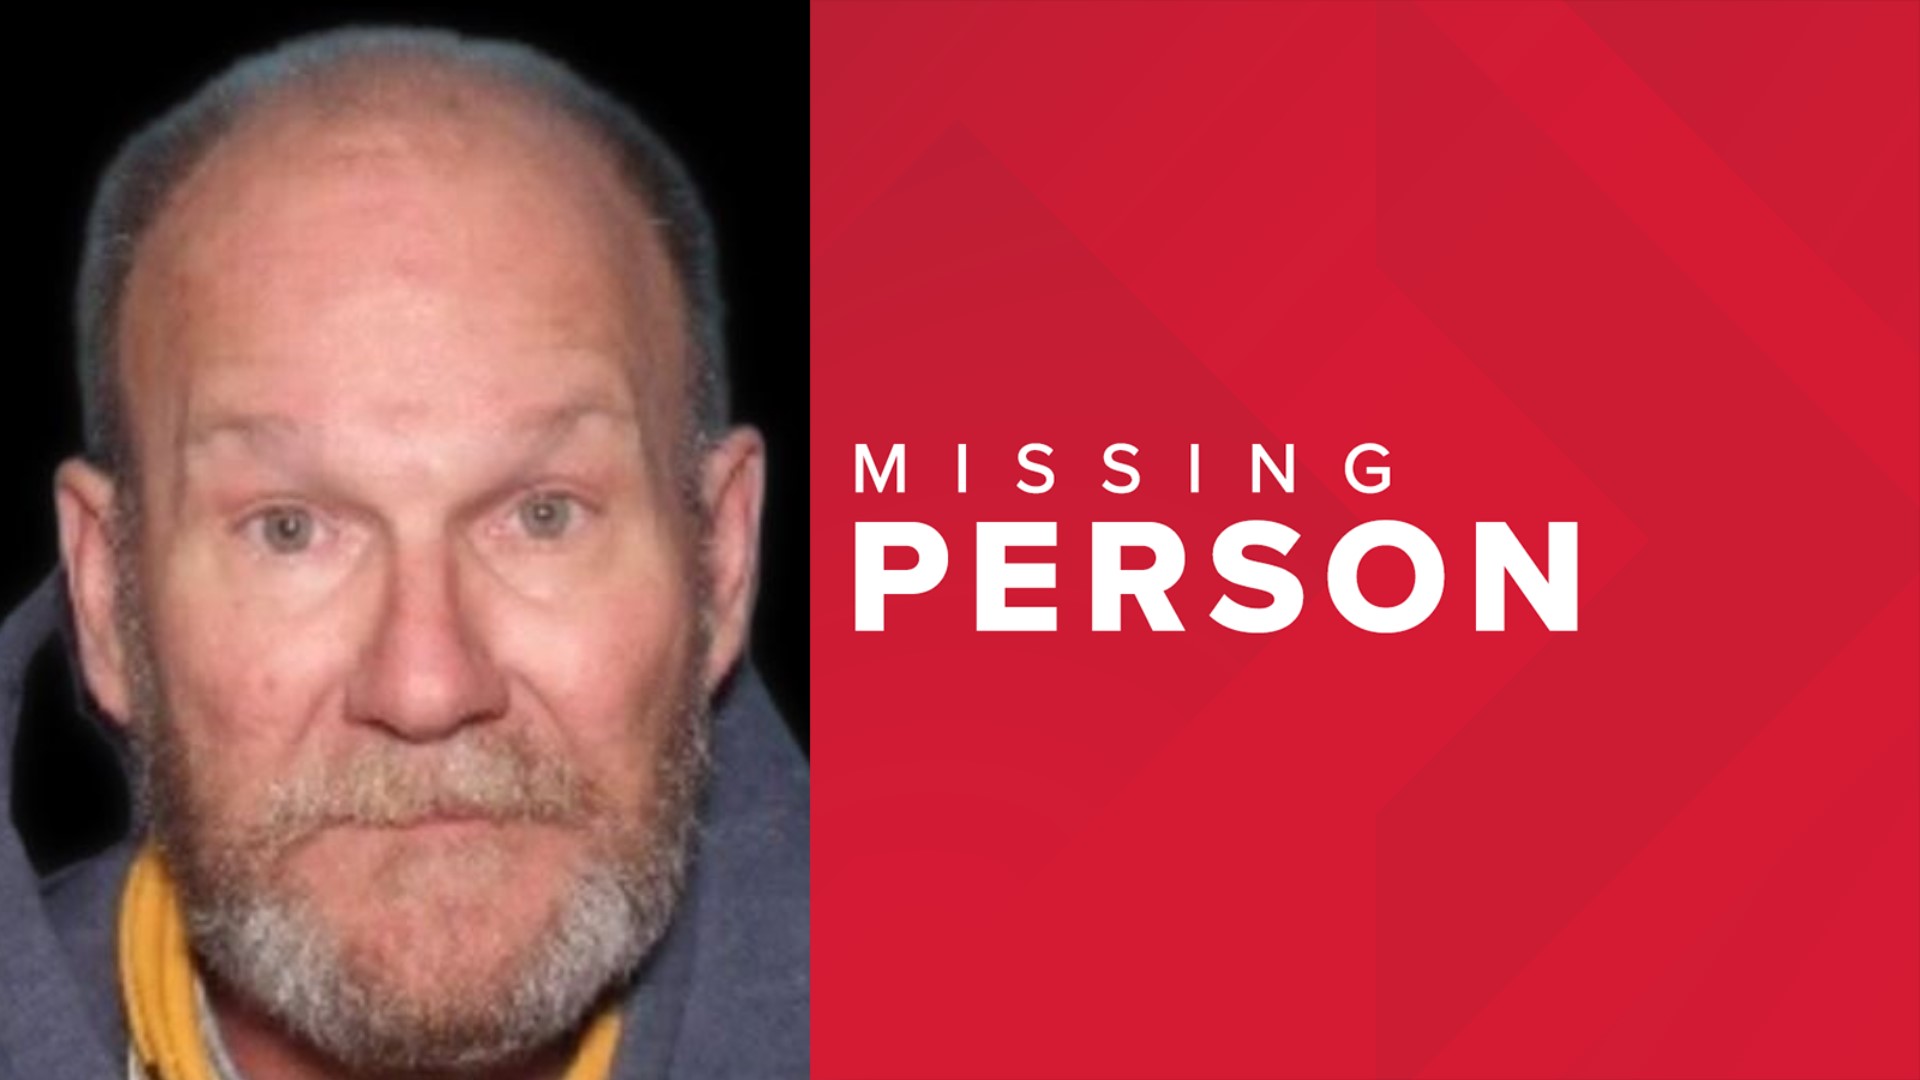 Police say Jeff Blank has memory issues and may struggle finding his way home.